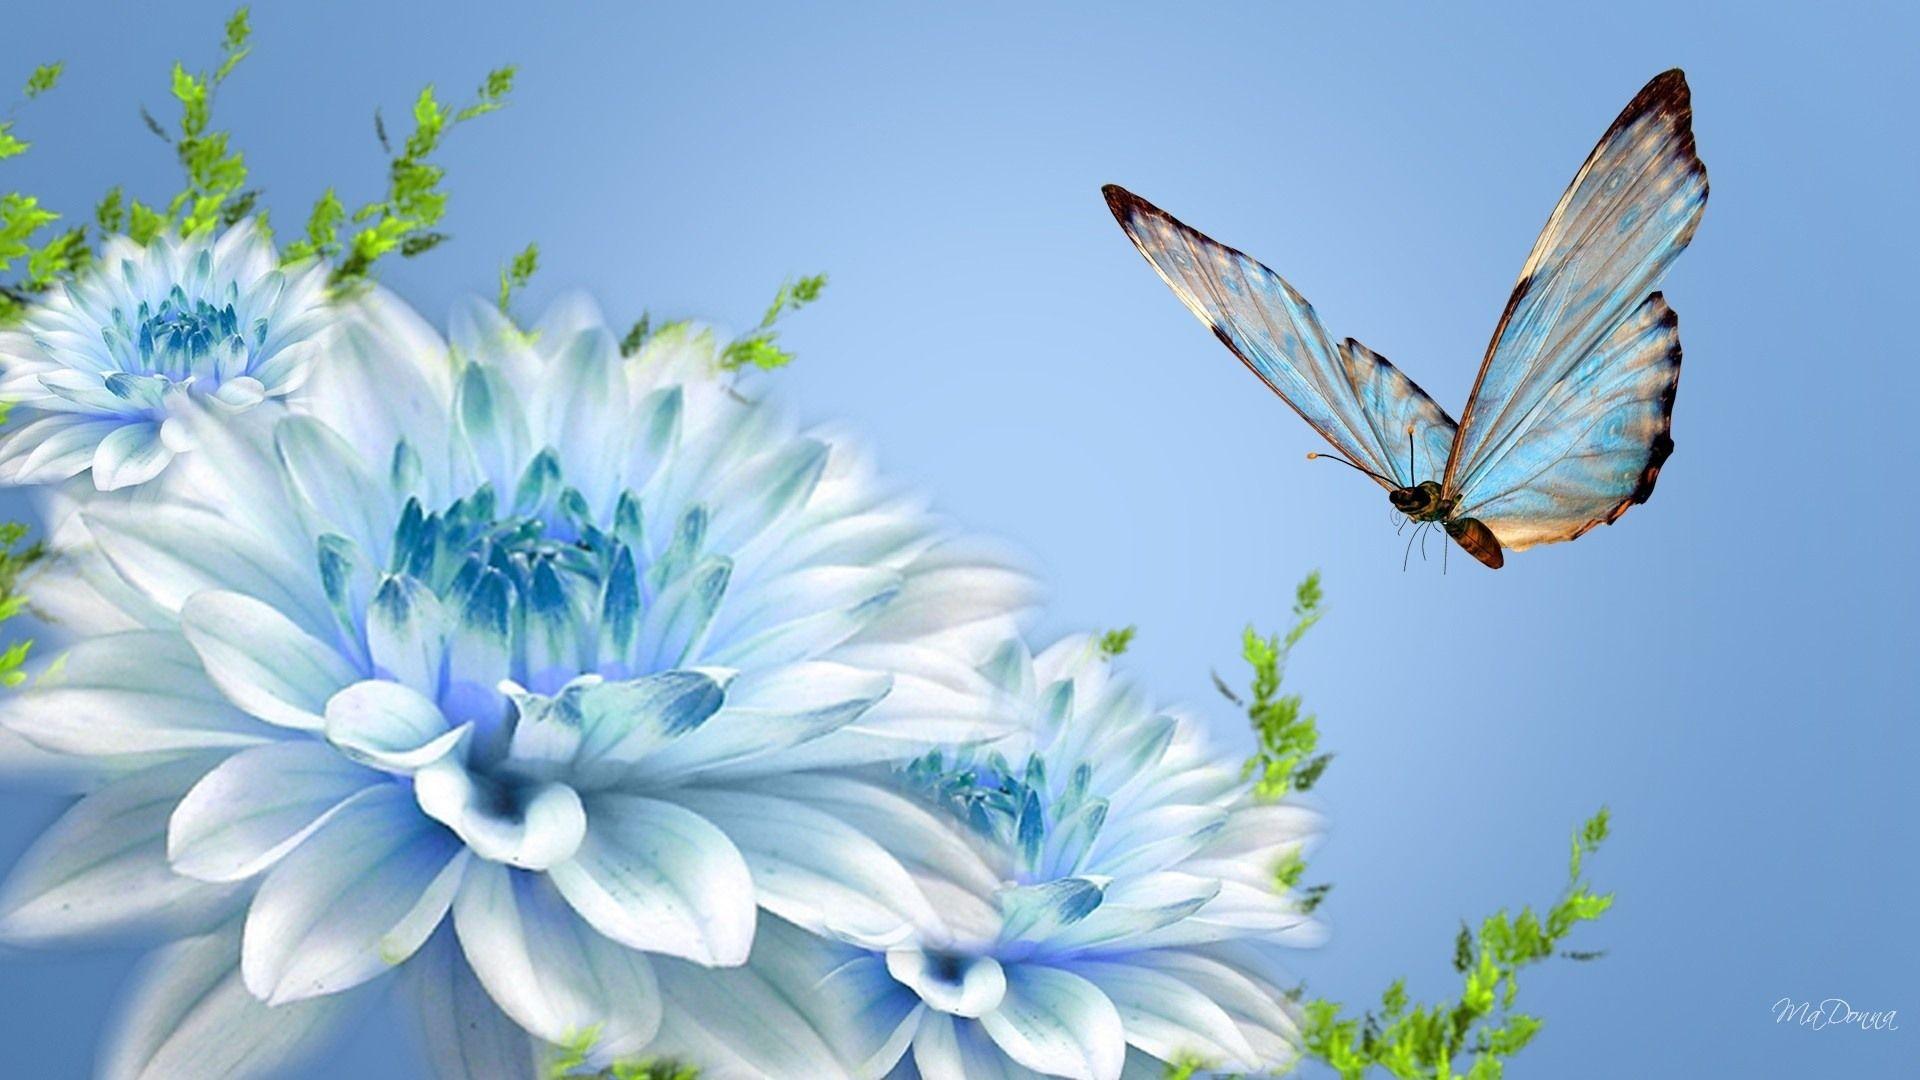 Pretty Butterfly Background